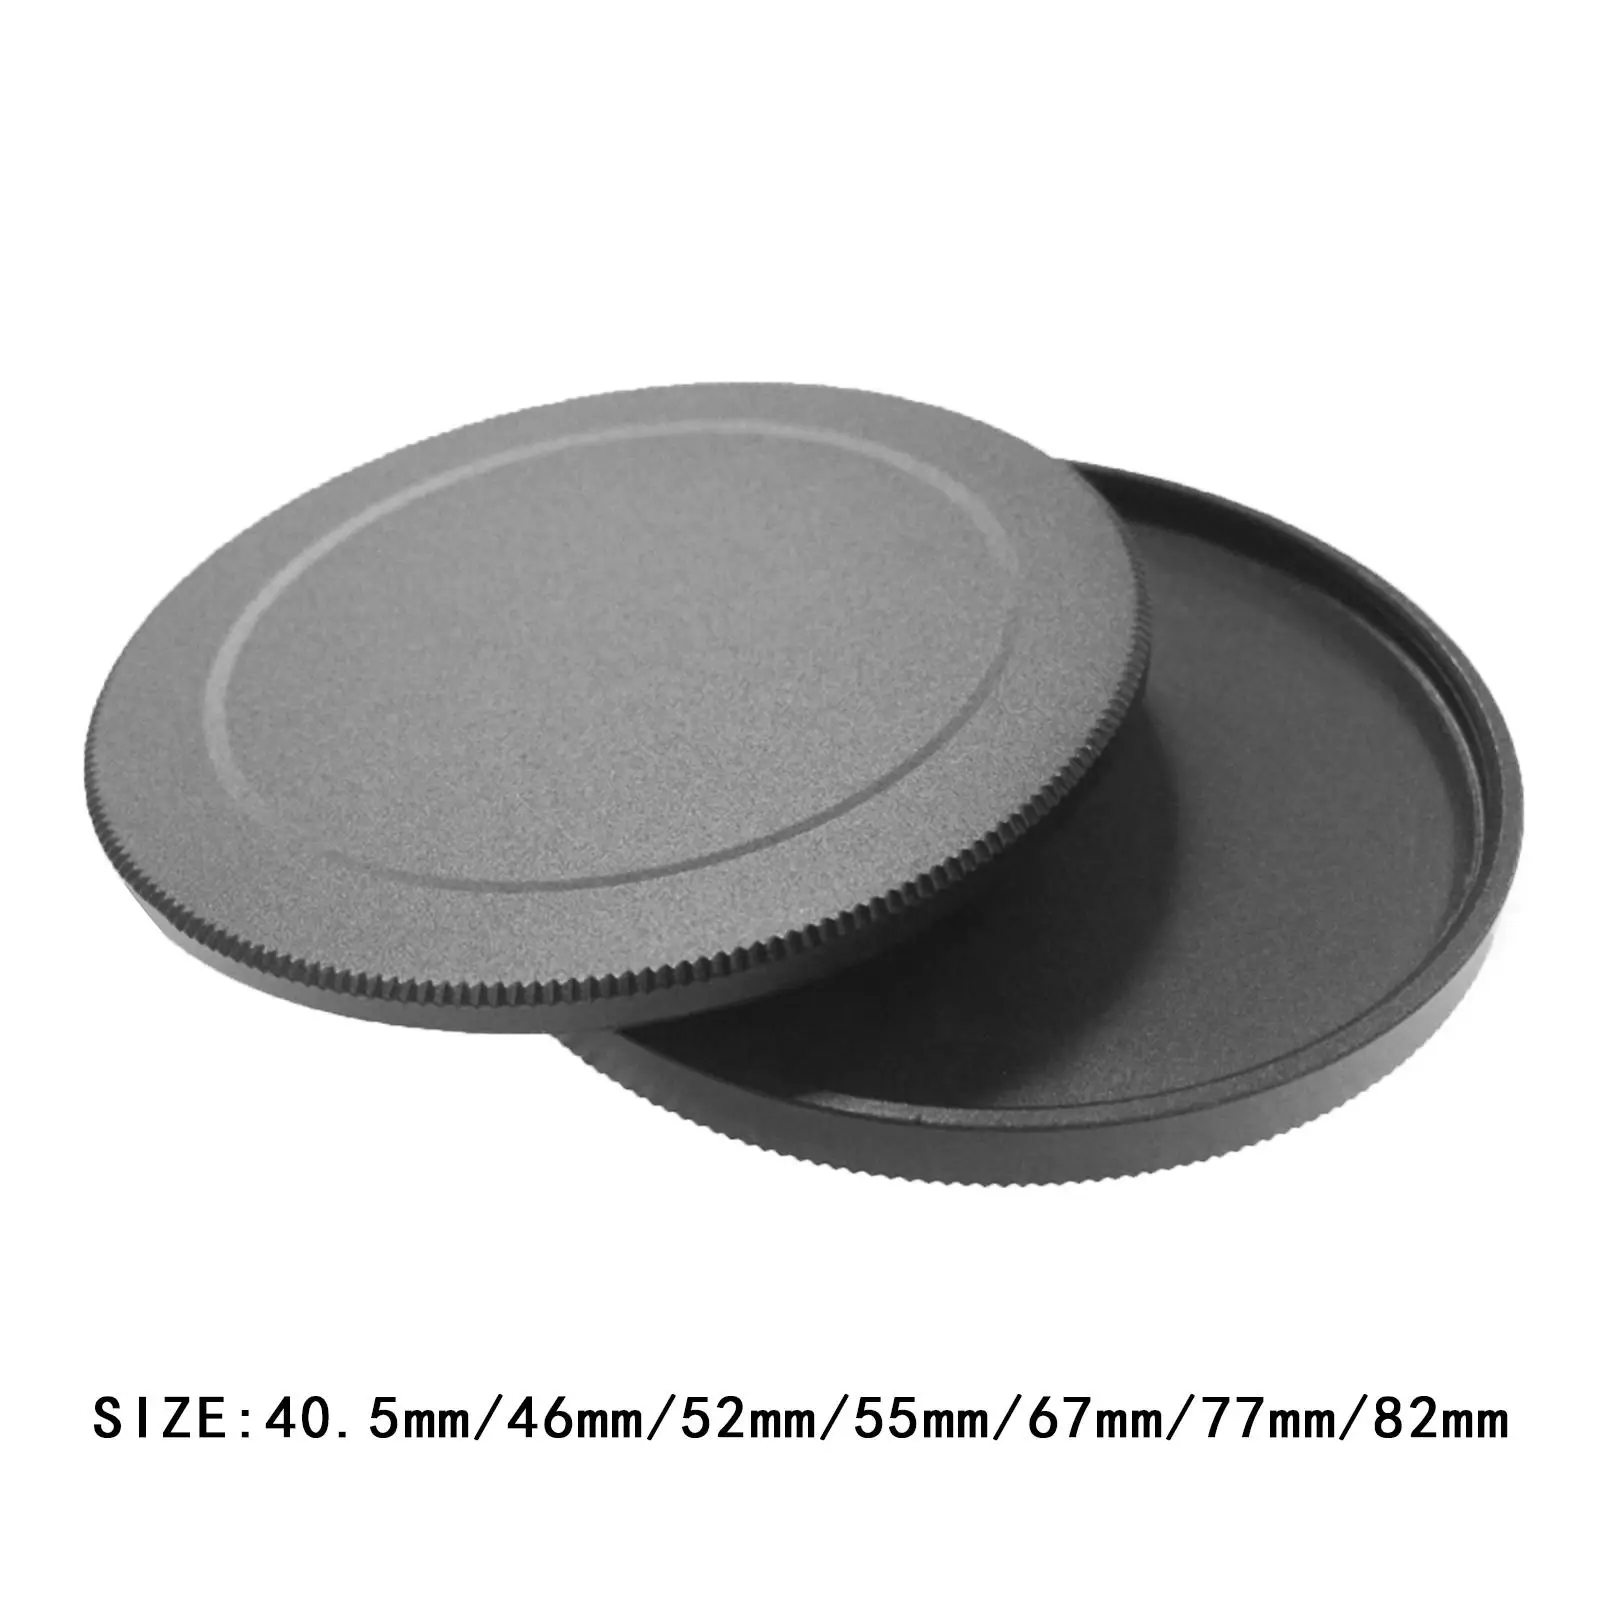 2 Pieces Metal Screw in Lens Filter Stack Caps Filters Cover Front Rear Case for Cpl Fader Filters Metal Box Storage Caps